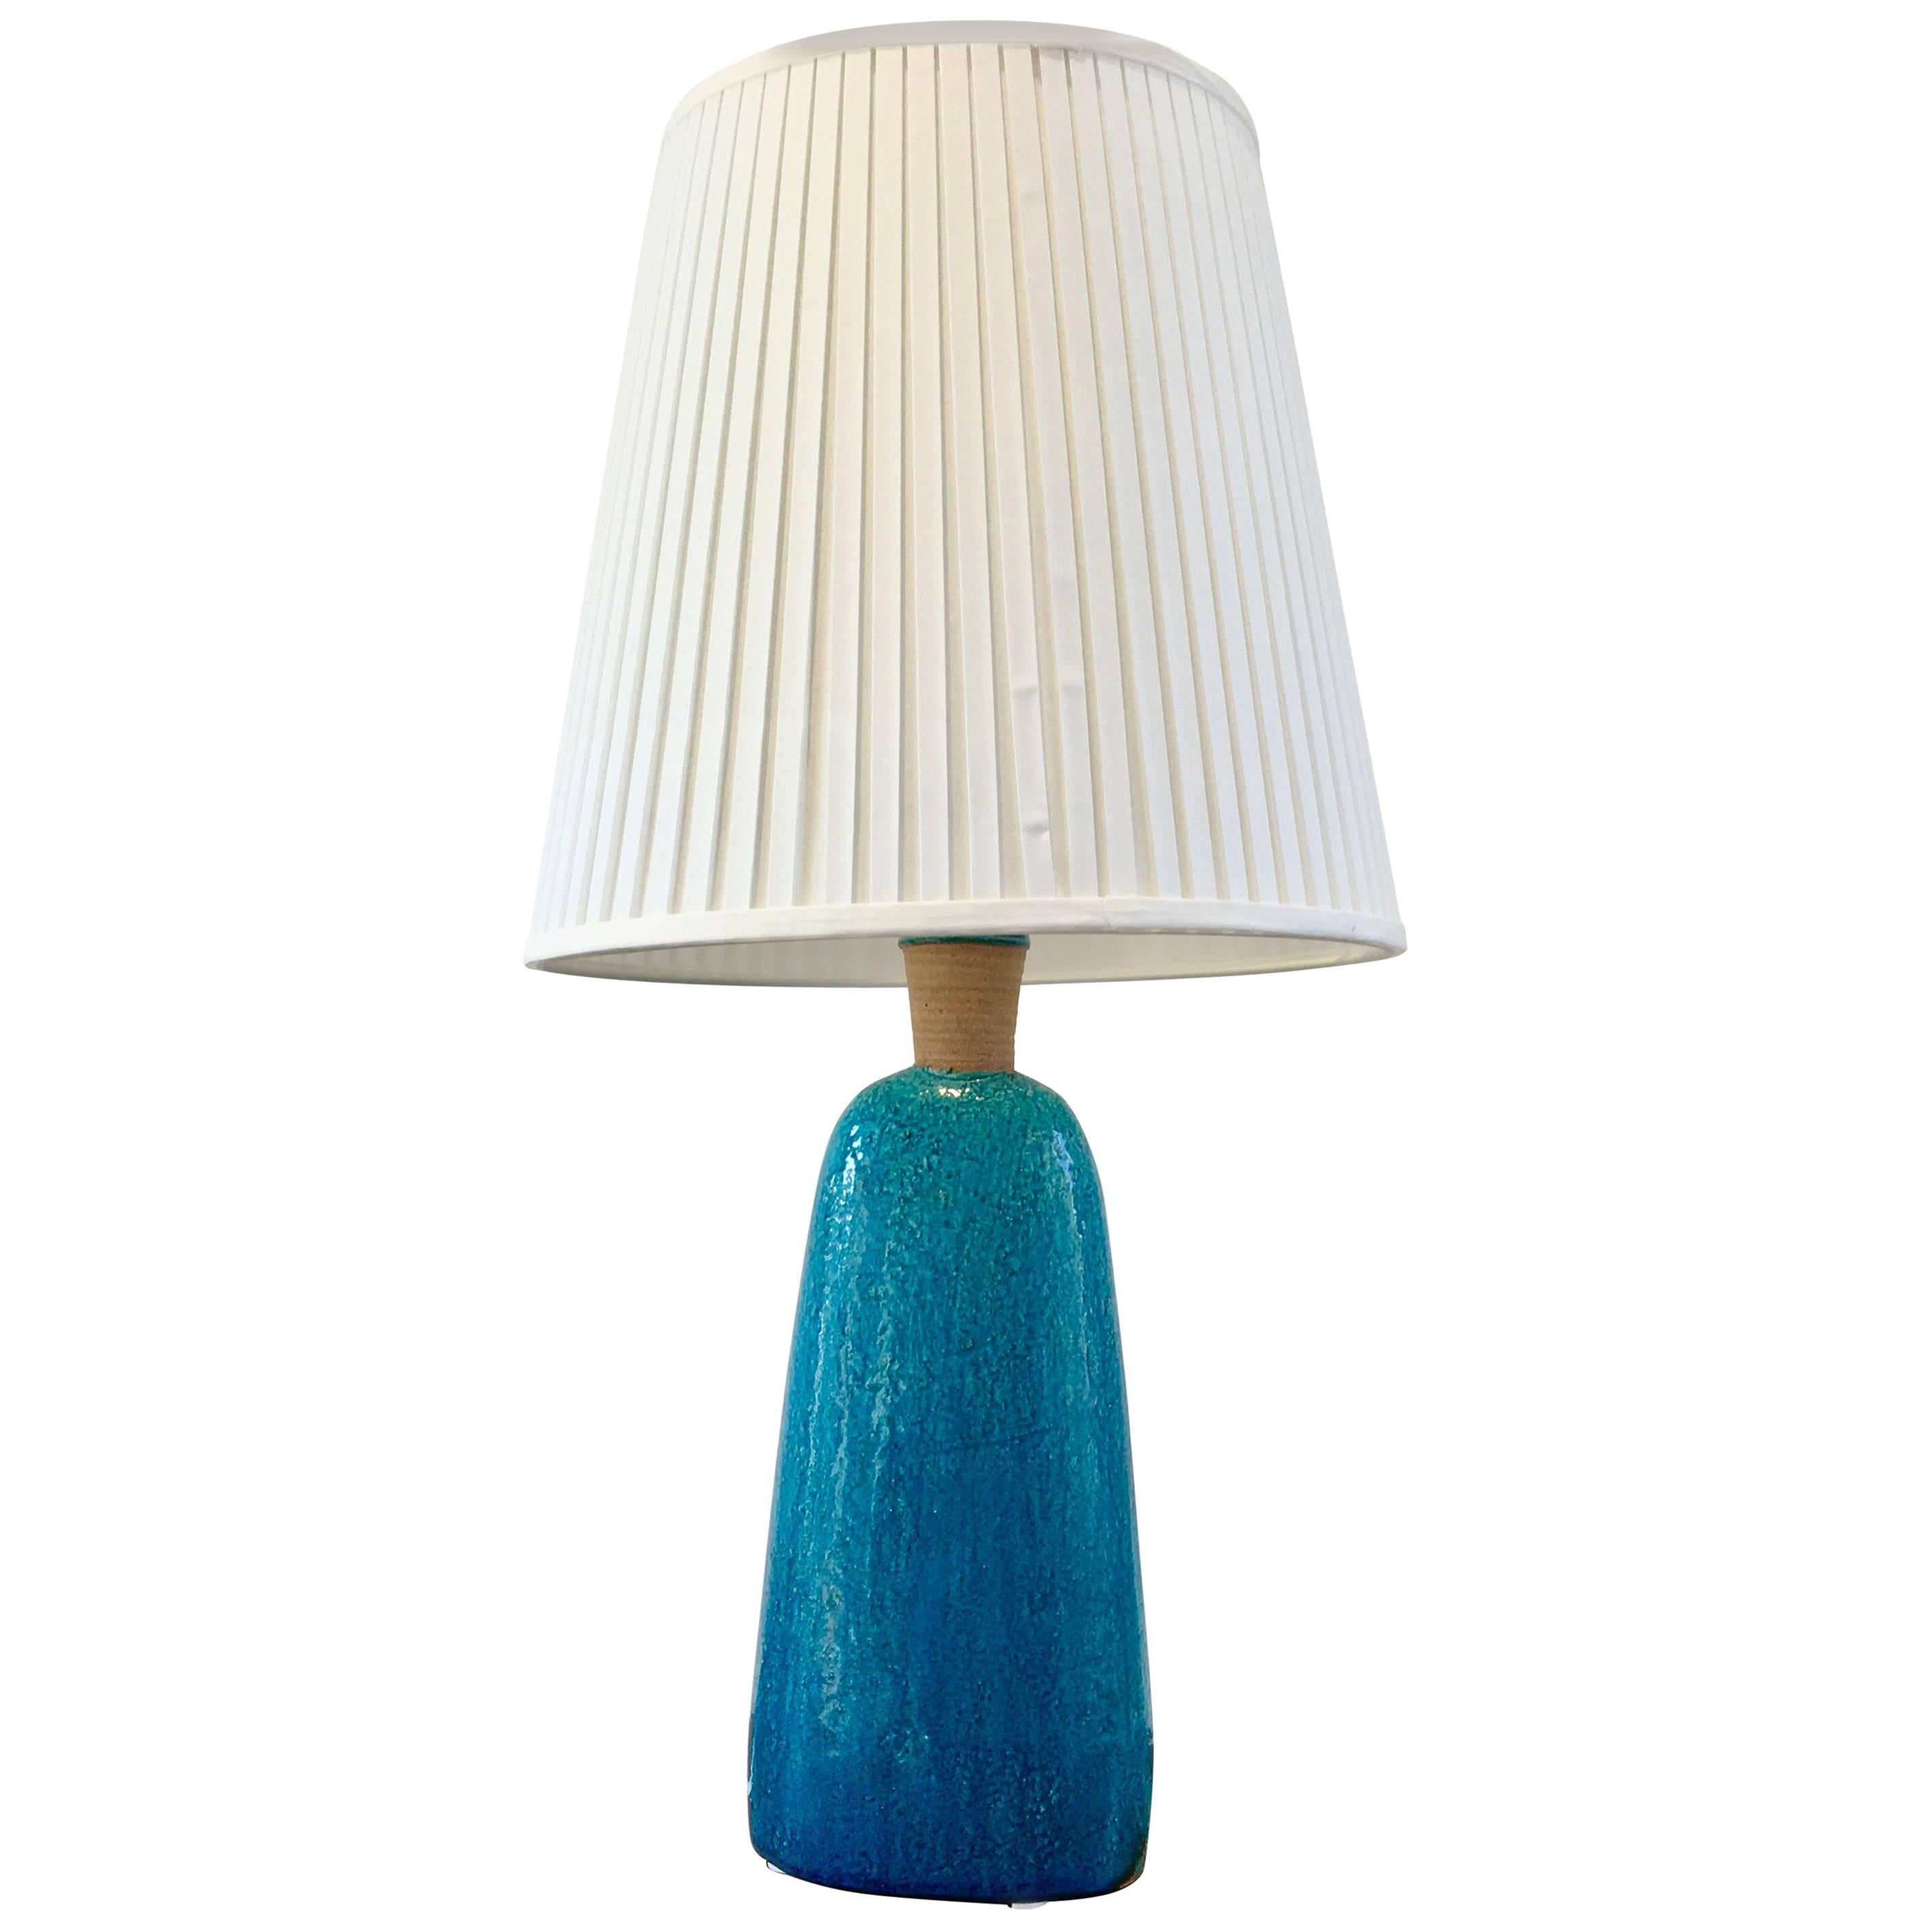 Large 1950s Turquoise Midcentury Table Lamp by Nils Kähler